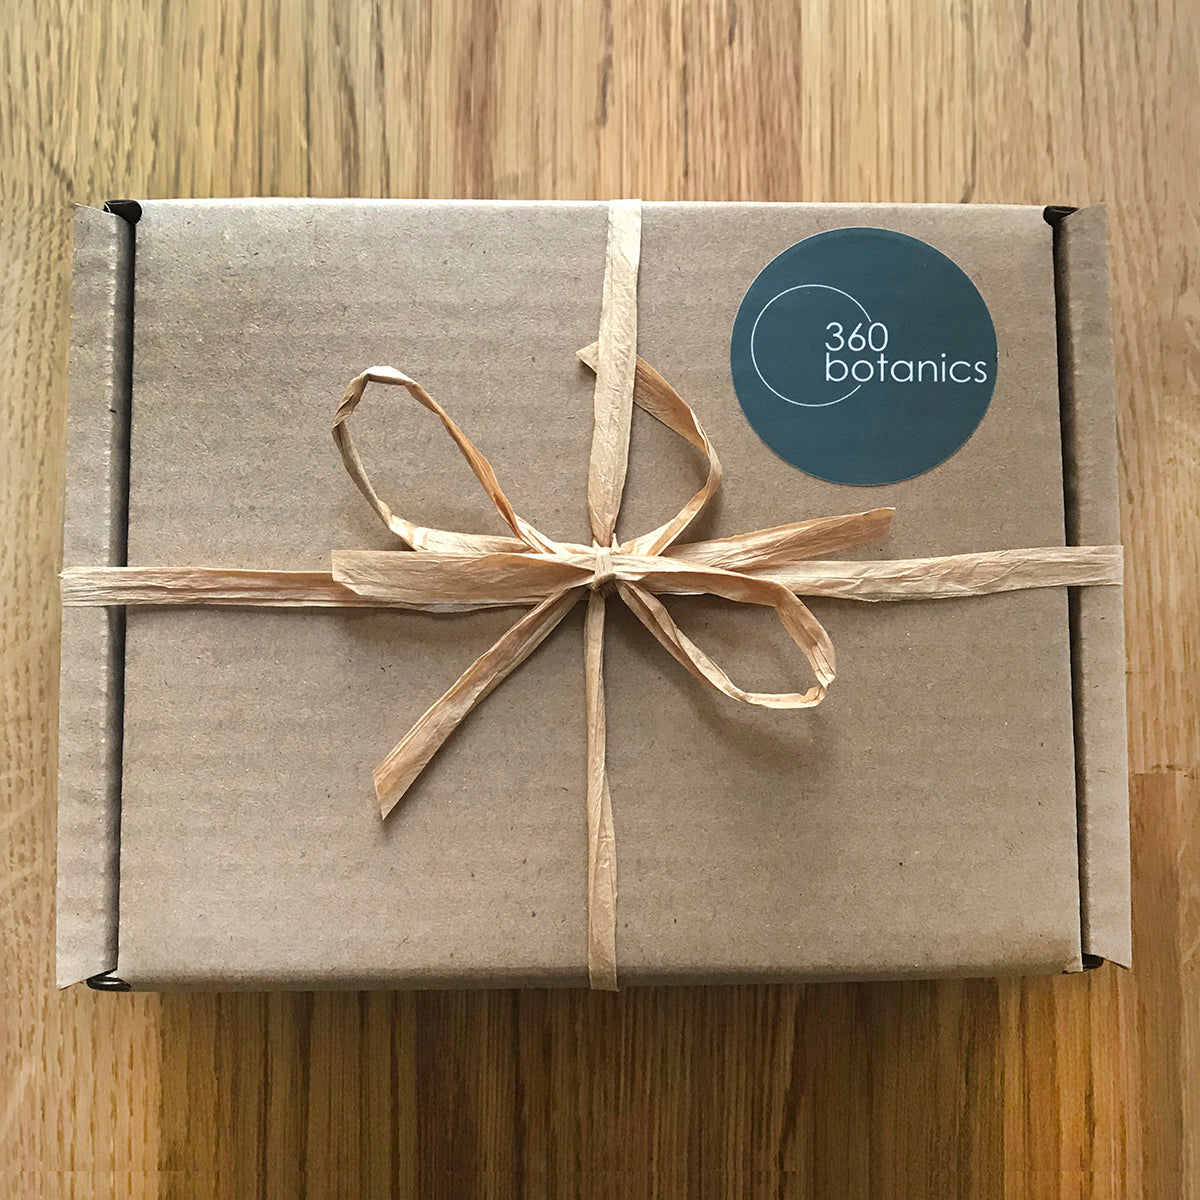  A brown cardboard gift box tied with a natural raffia ribbon and a 360 Botanics sticker on the top, placed on a wooden surface.